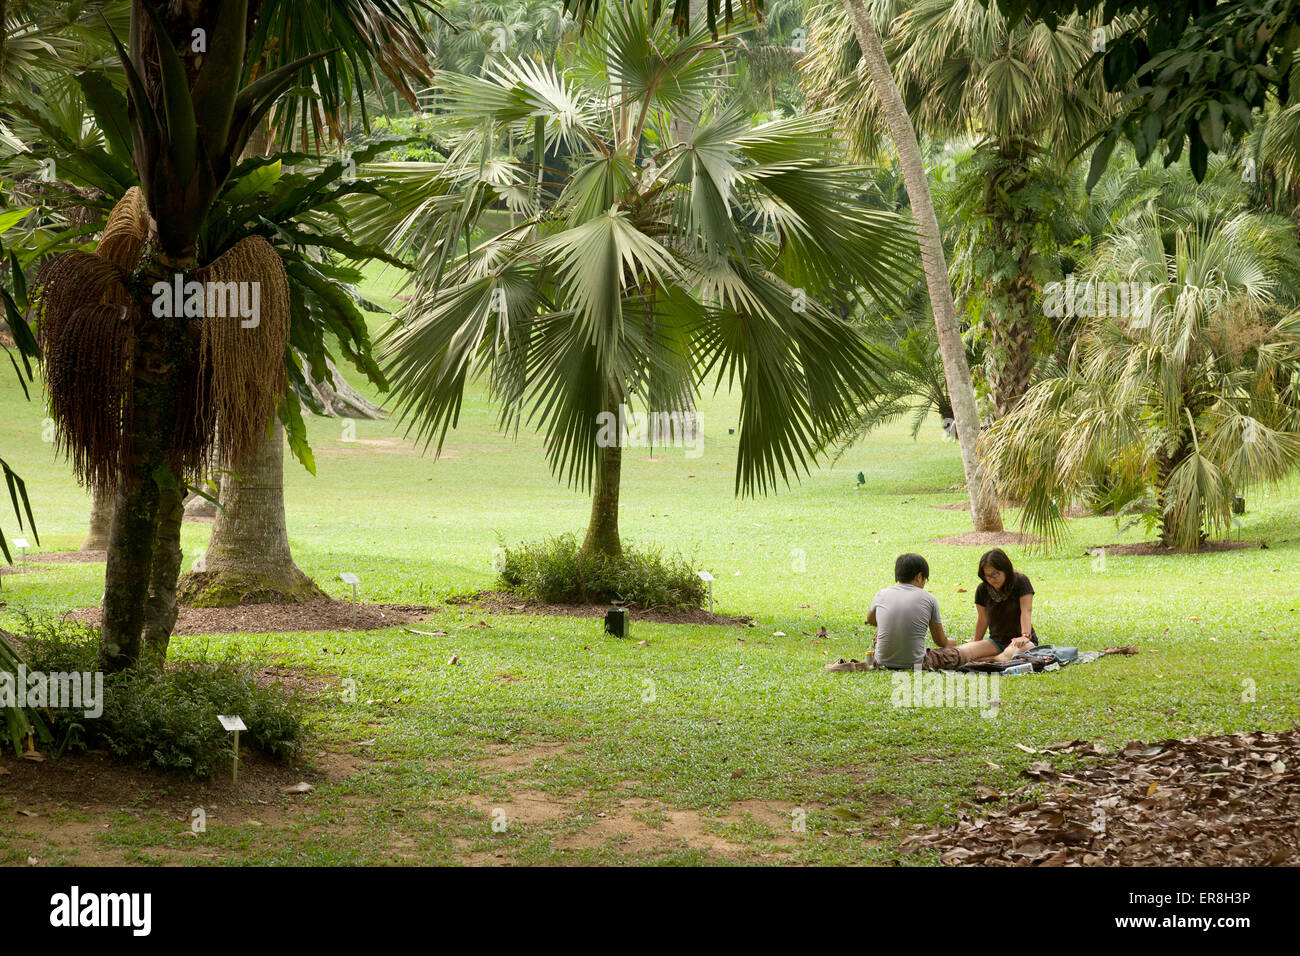 People sitting in the Singapore Botanic Gardens, Singapore, South East Asia Stock Photo